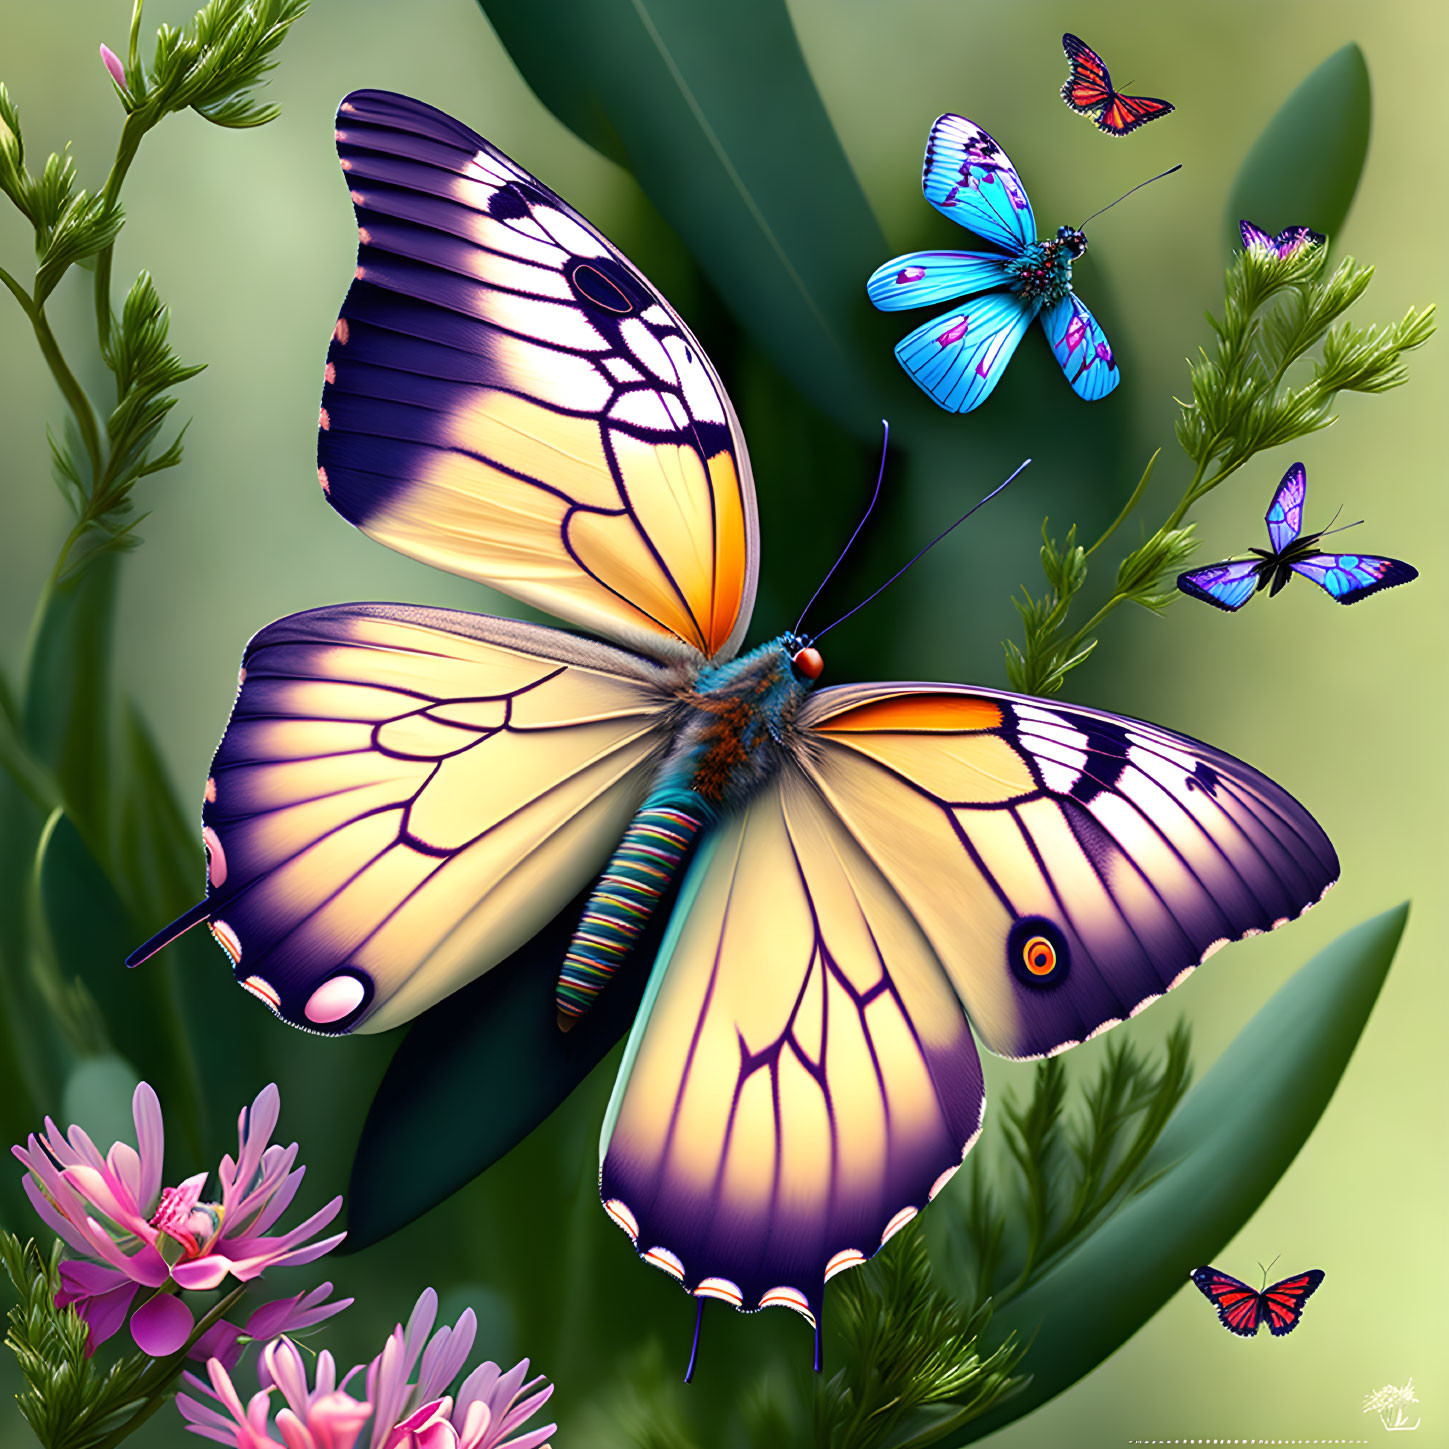 Colorful Digital Artwork: Butterflies and Flowers in Nature